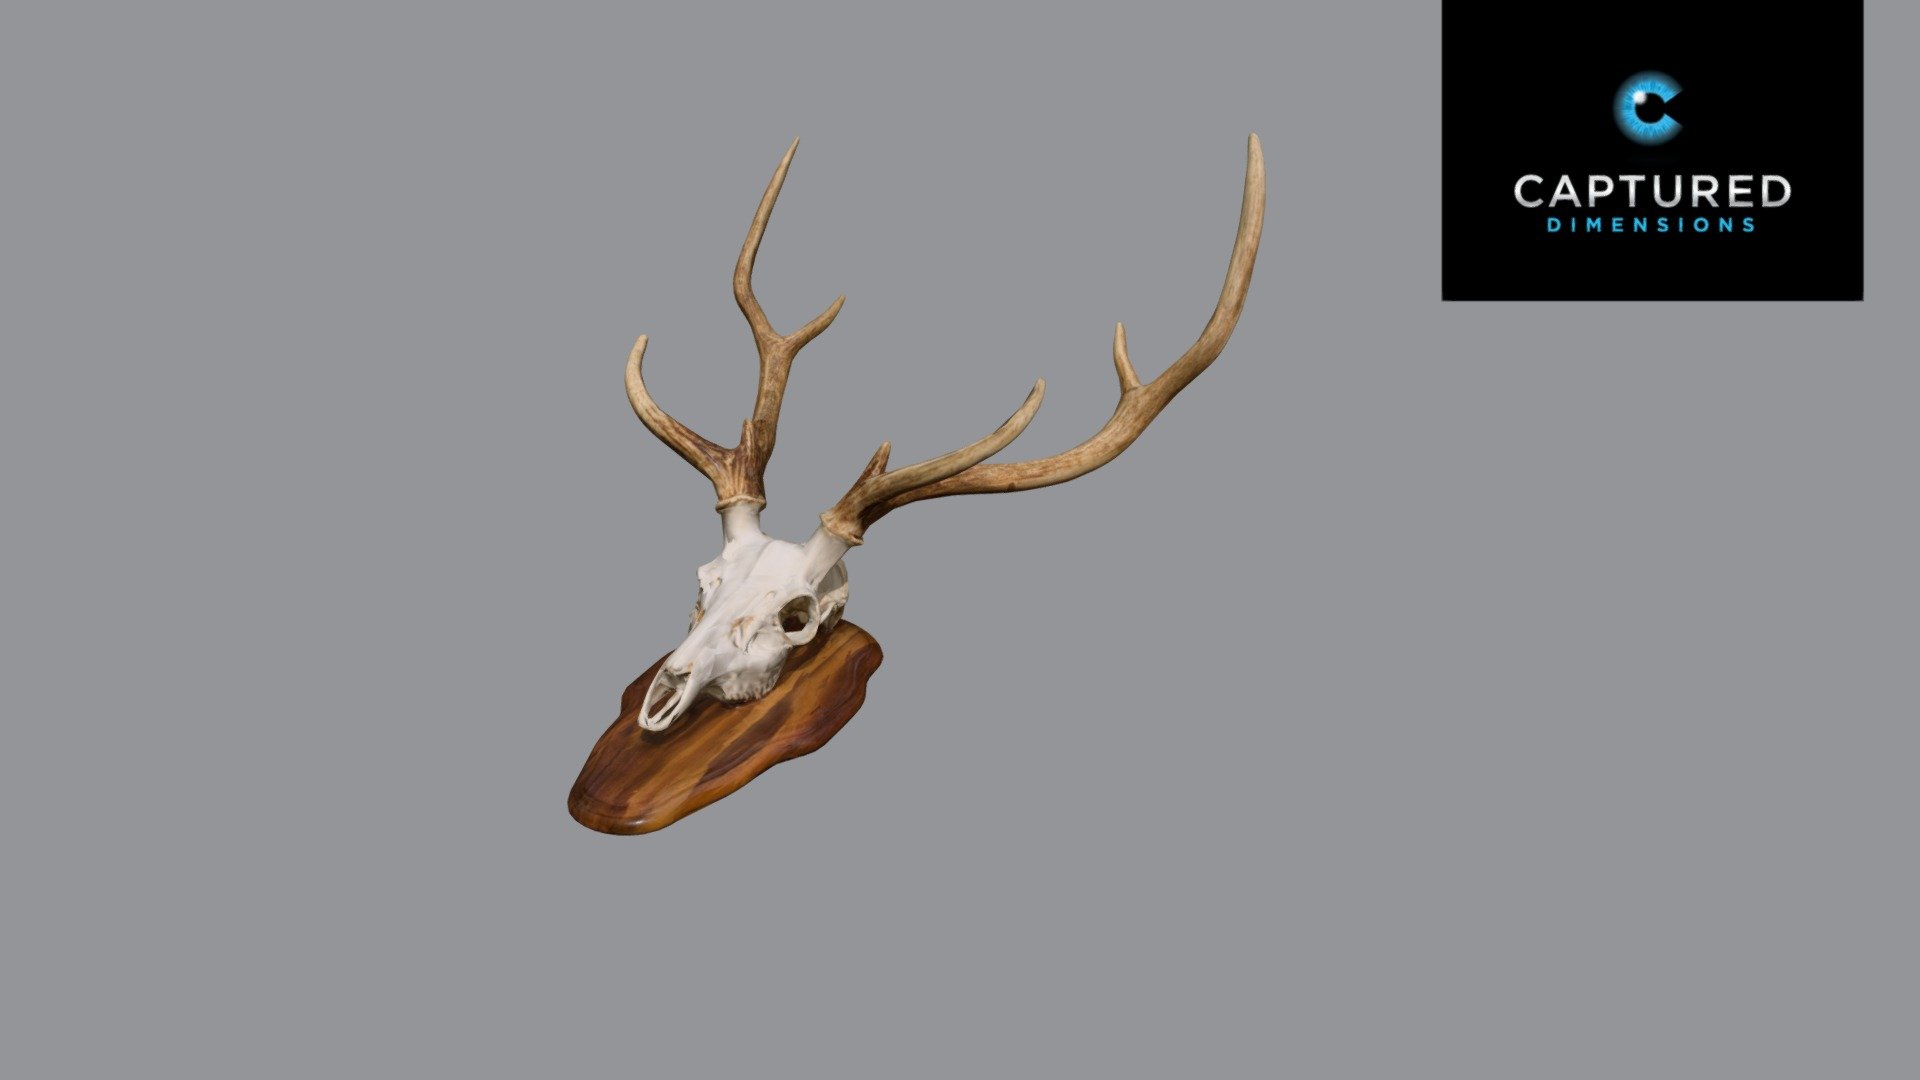 Deer Skull with antlers, VR, AR, architecture viz use. Ready for re-topology. Captured using Artec Hand Scanner in CD Studio. For more information, visit our website www.captureddimensions.com

*Reference scan may not be animation ready. Scan’s are either Zremeshed or decimated to a lower polygon count than original capture. The scan has been UV mapped and the textures have been reprojected.

Included Files * 1 x Scan data .obj

Textures:

Diffuse (8192x8192)
Normal (8192x8192)
Roughness (8192x8192) - Axis Deer Skull - Buy Royalty Free 3D model by captureddimensions 3d model